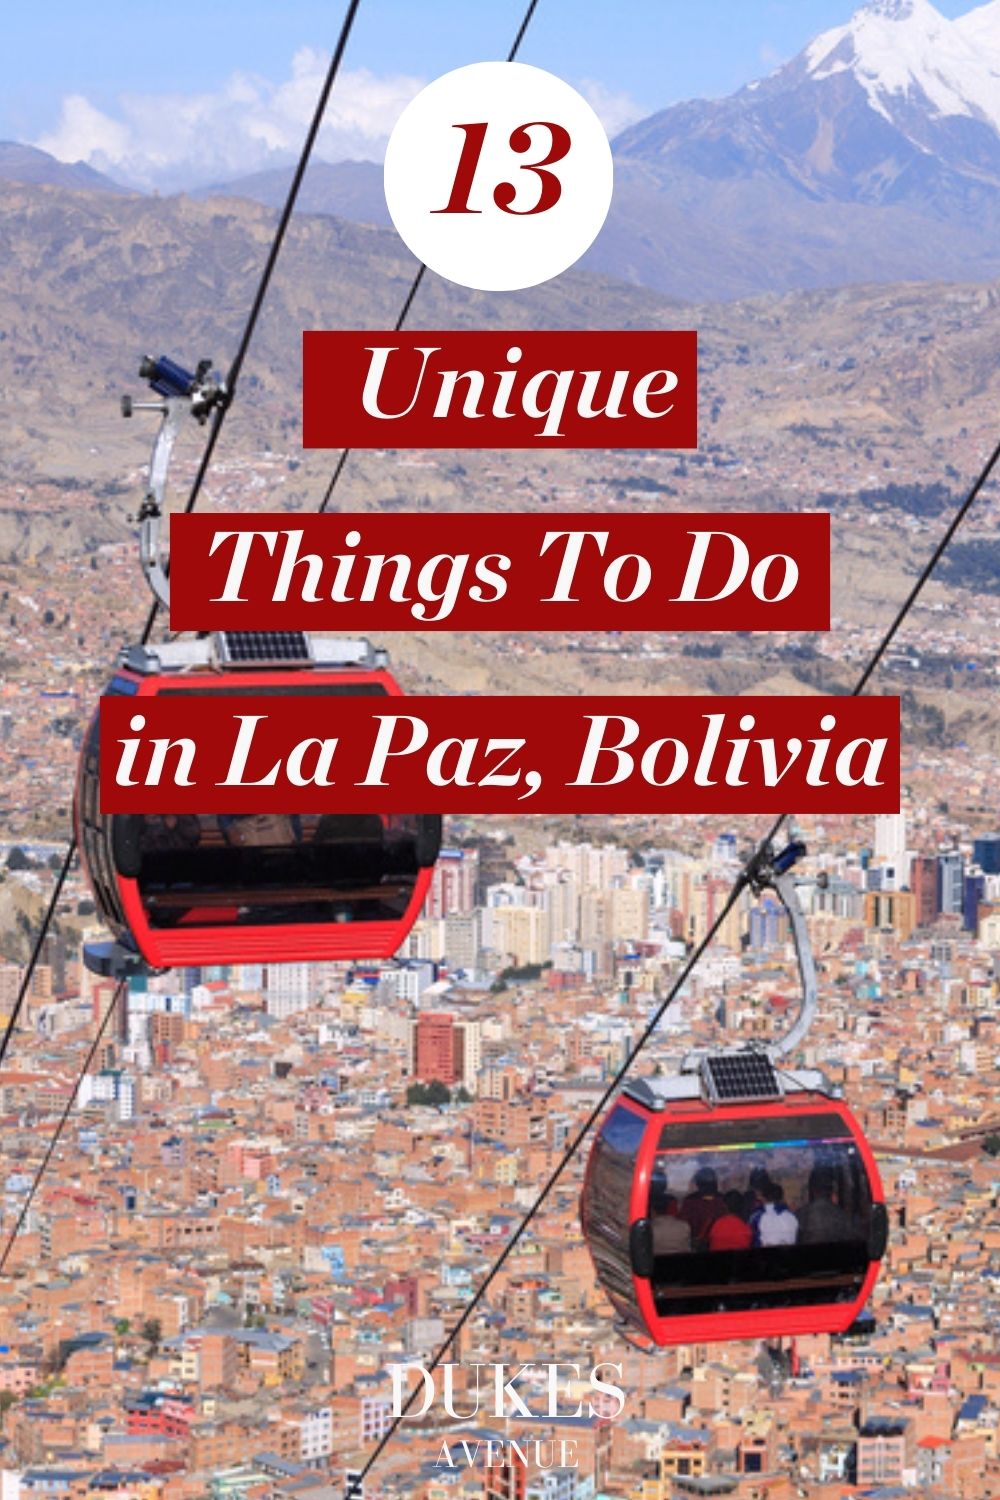 Image of a cable car over the mountains in La Paz, Bolivia with text overlay '13 Unique Things to do in La Paz, Bolivia'